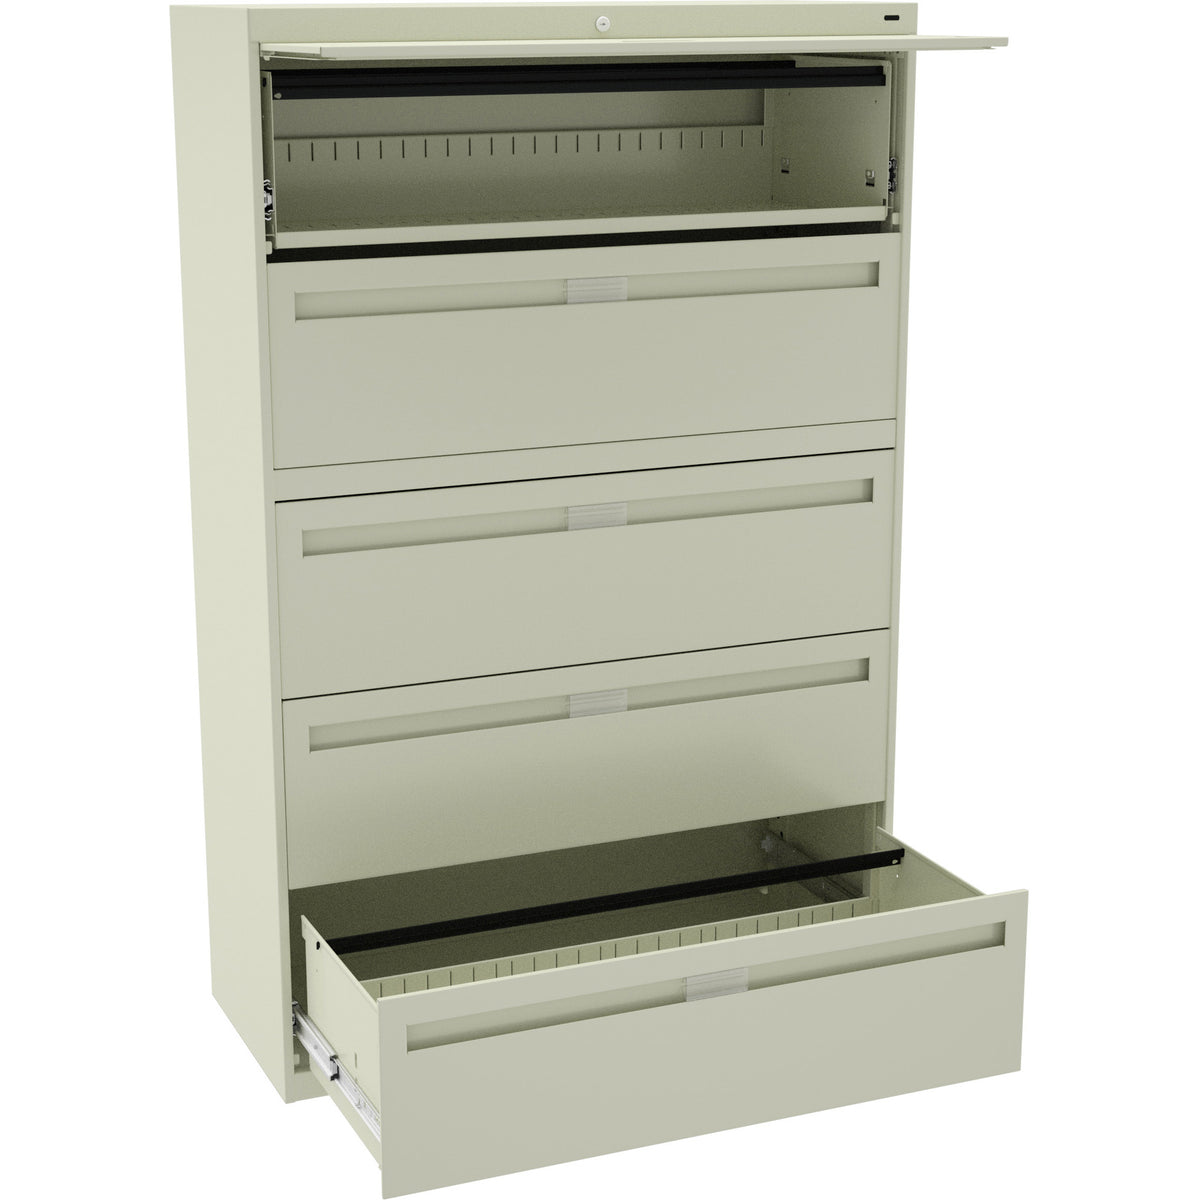 Tennsco 42" Wide Five-Drawer Lateral File with Fixed Drawer Fronts, LPL4260L50